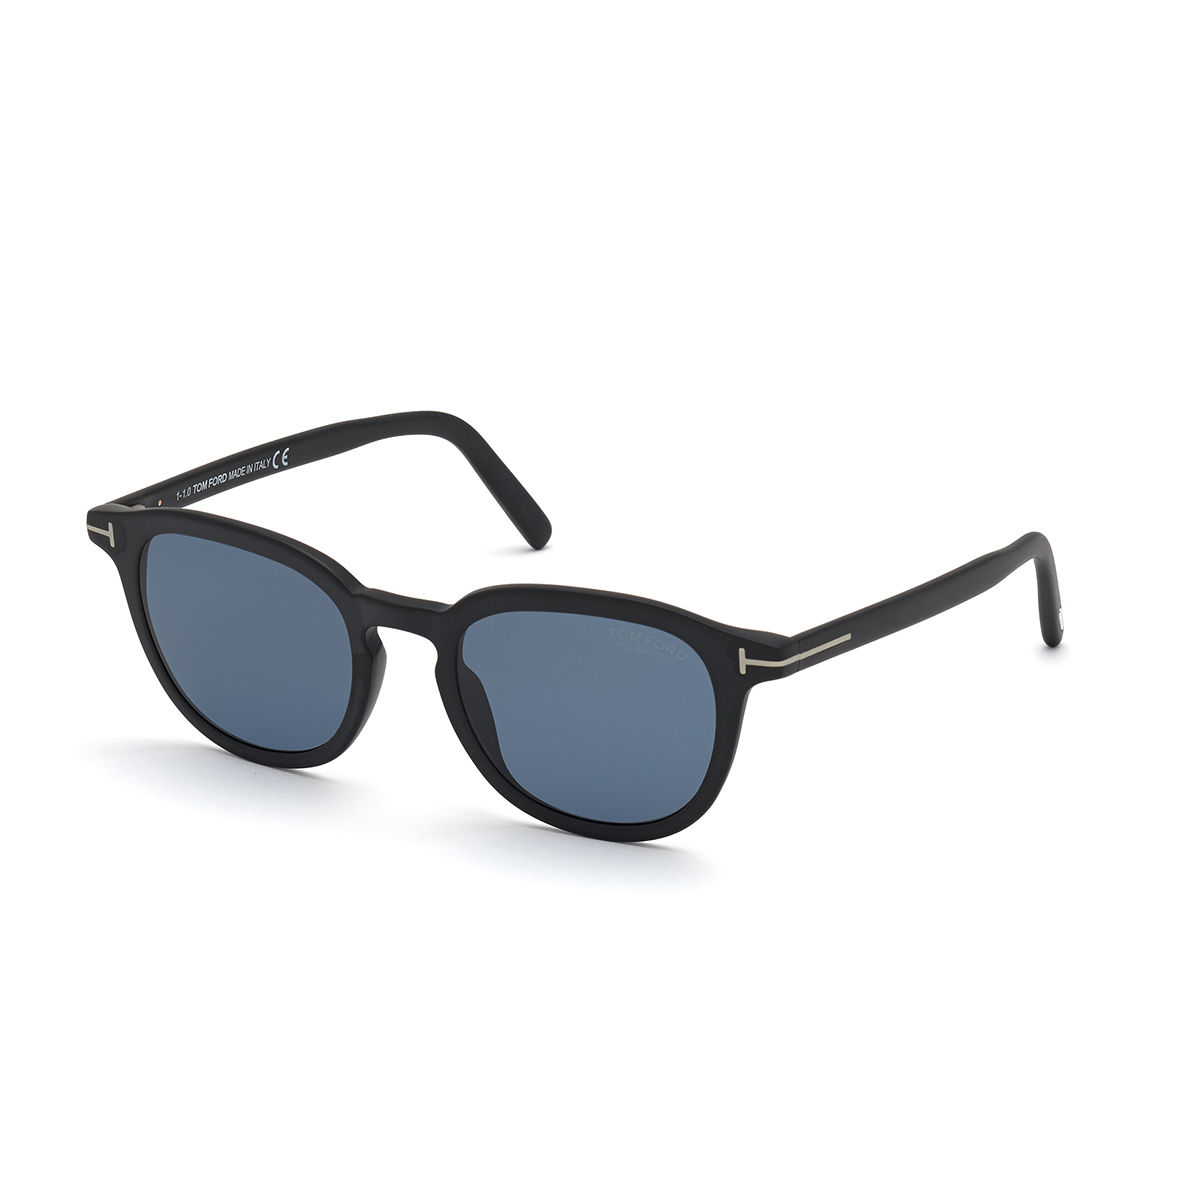 Tom Ford Sunglasses Black Plastic Sunglasses FT0816 51 02V: Buy Tom Ford  Sunglasses Black Plastic Sunglasses FT0816 51 02V Online at Best Price in  India | Nykaa